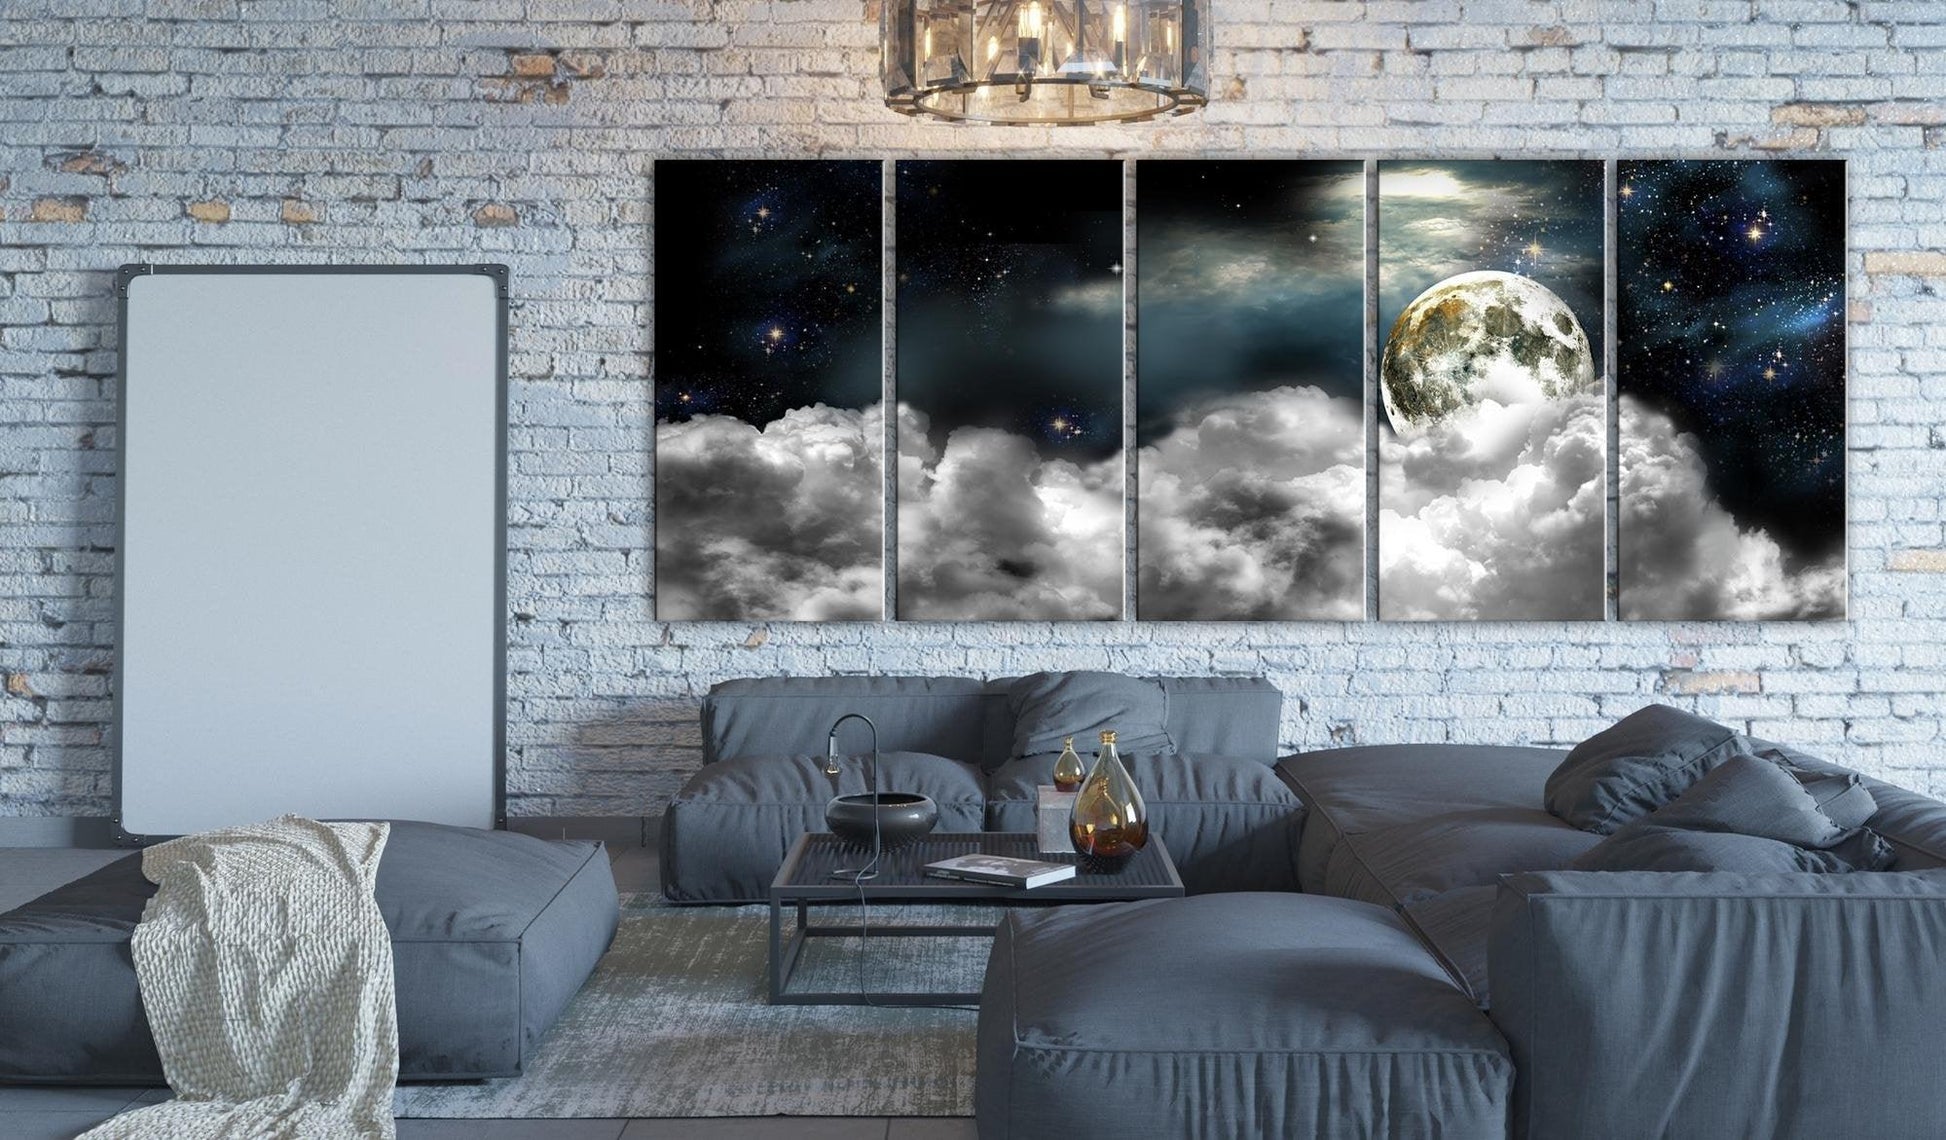 Canvas Print - Moon in the Clouds I - www.trendingbestsellers.com